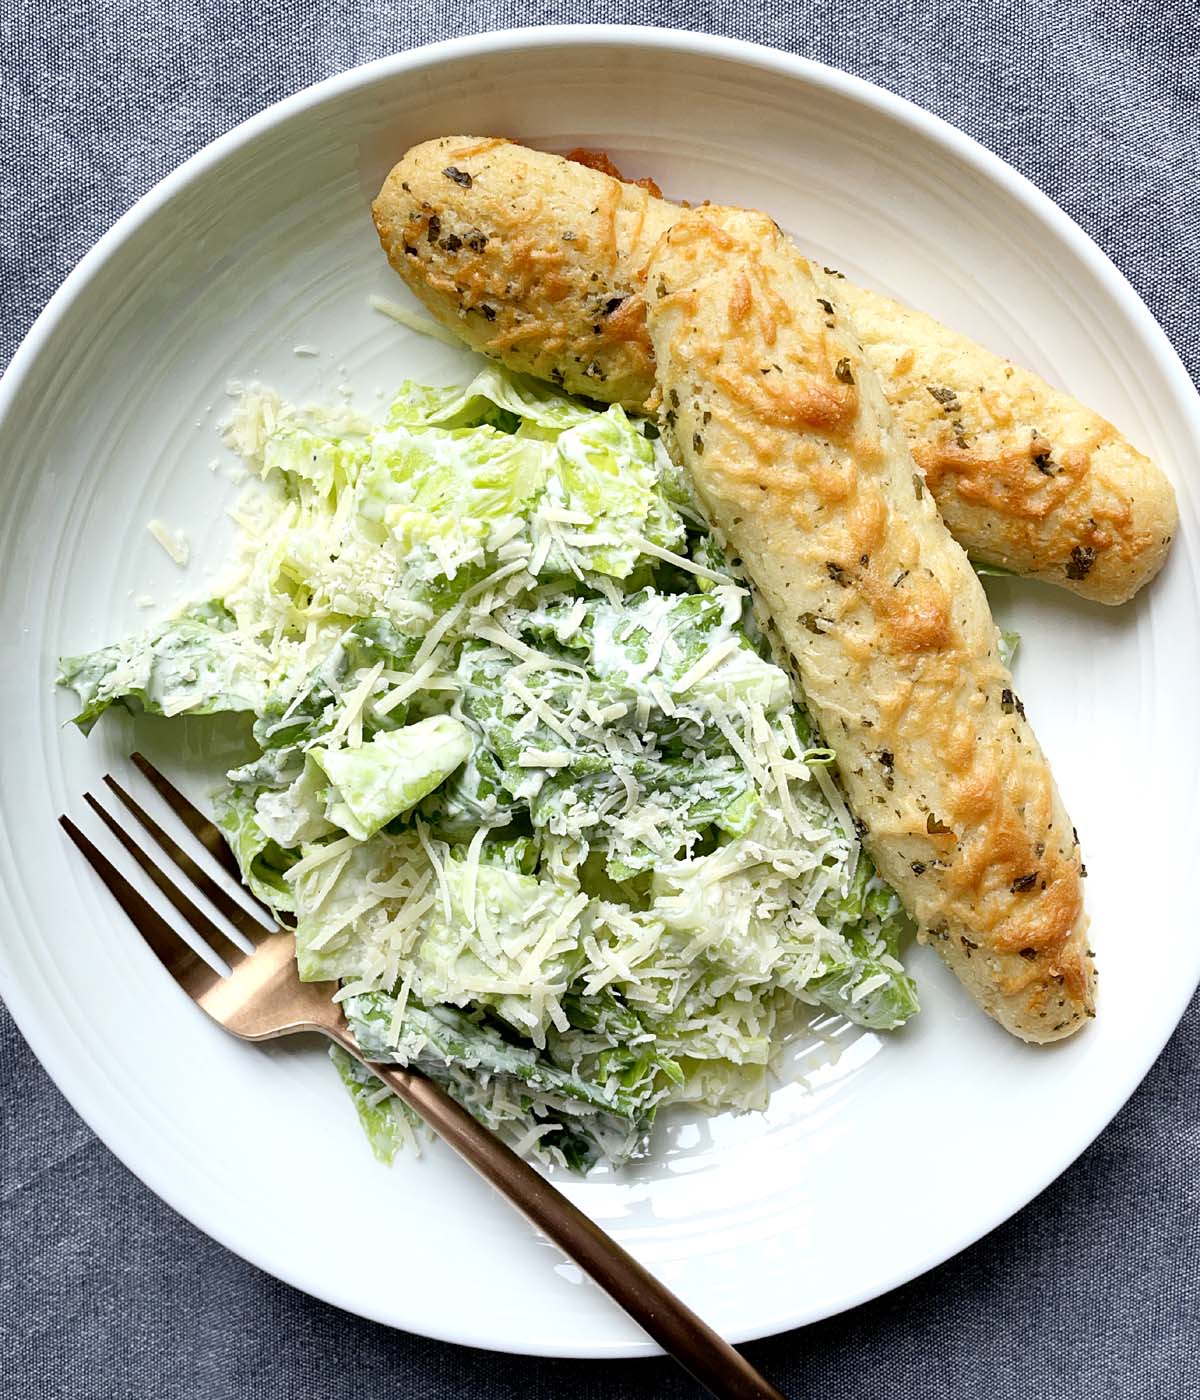 A white round dish containing a brown metal fork, Caesar salad, and two breadsticks.